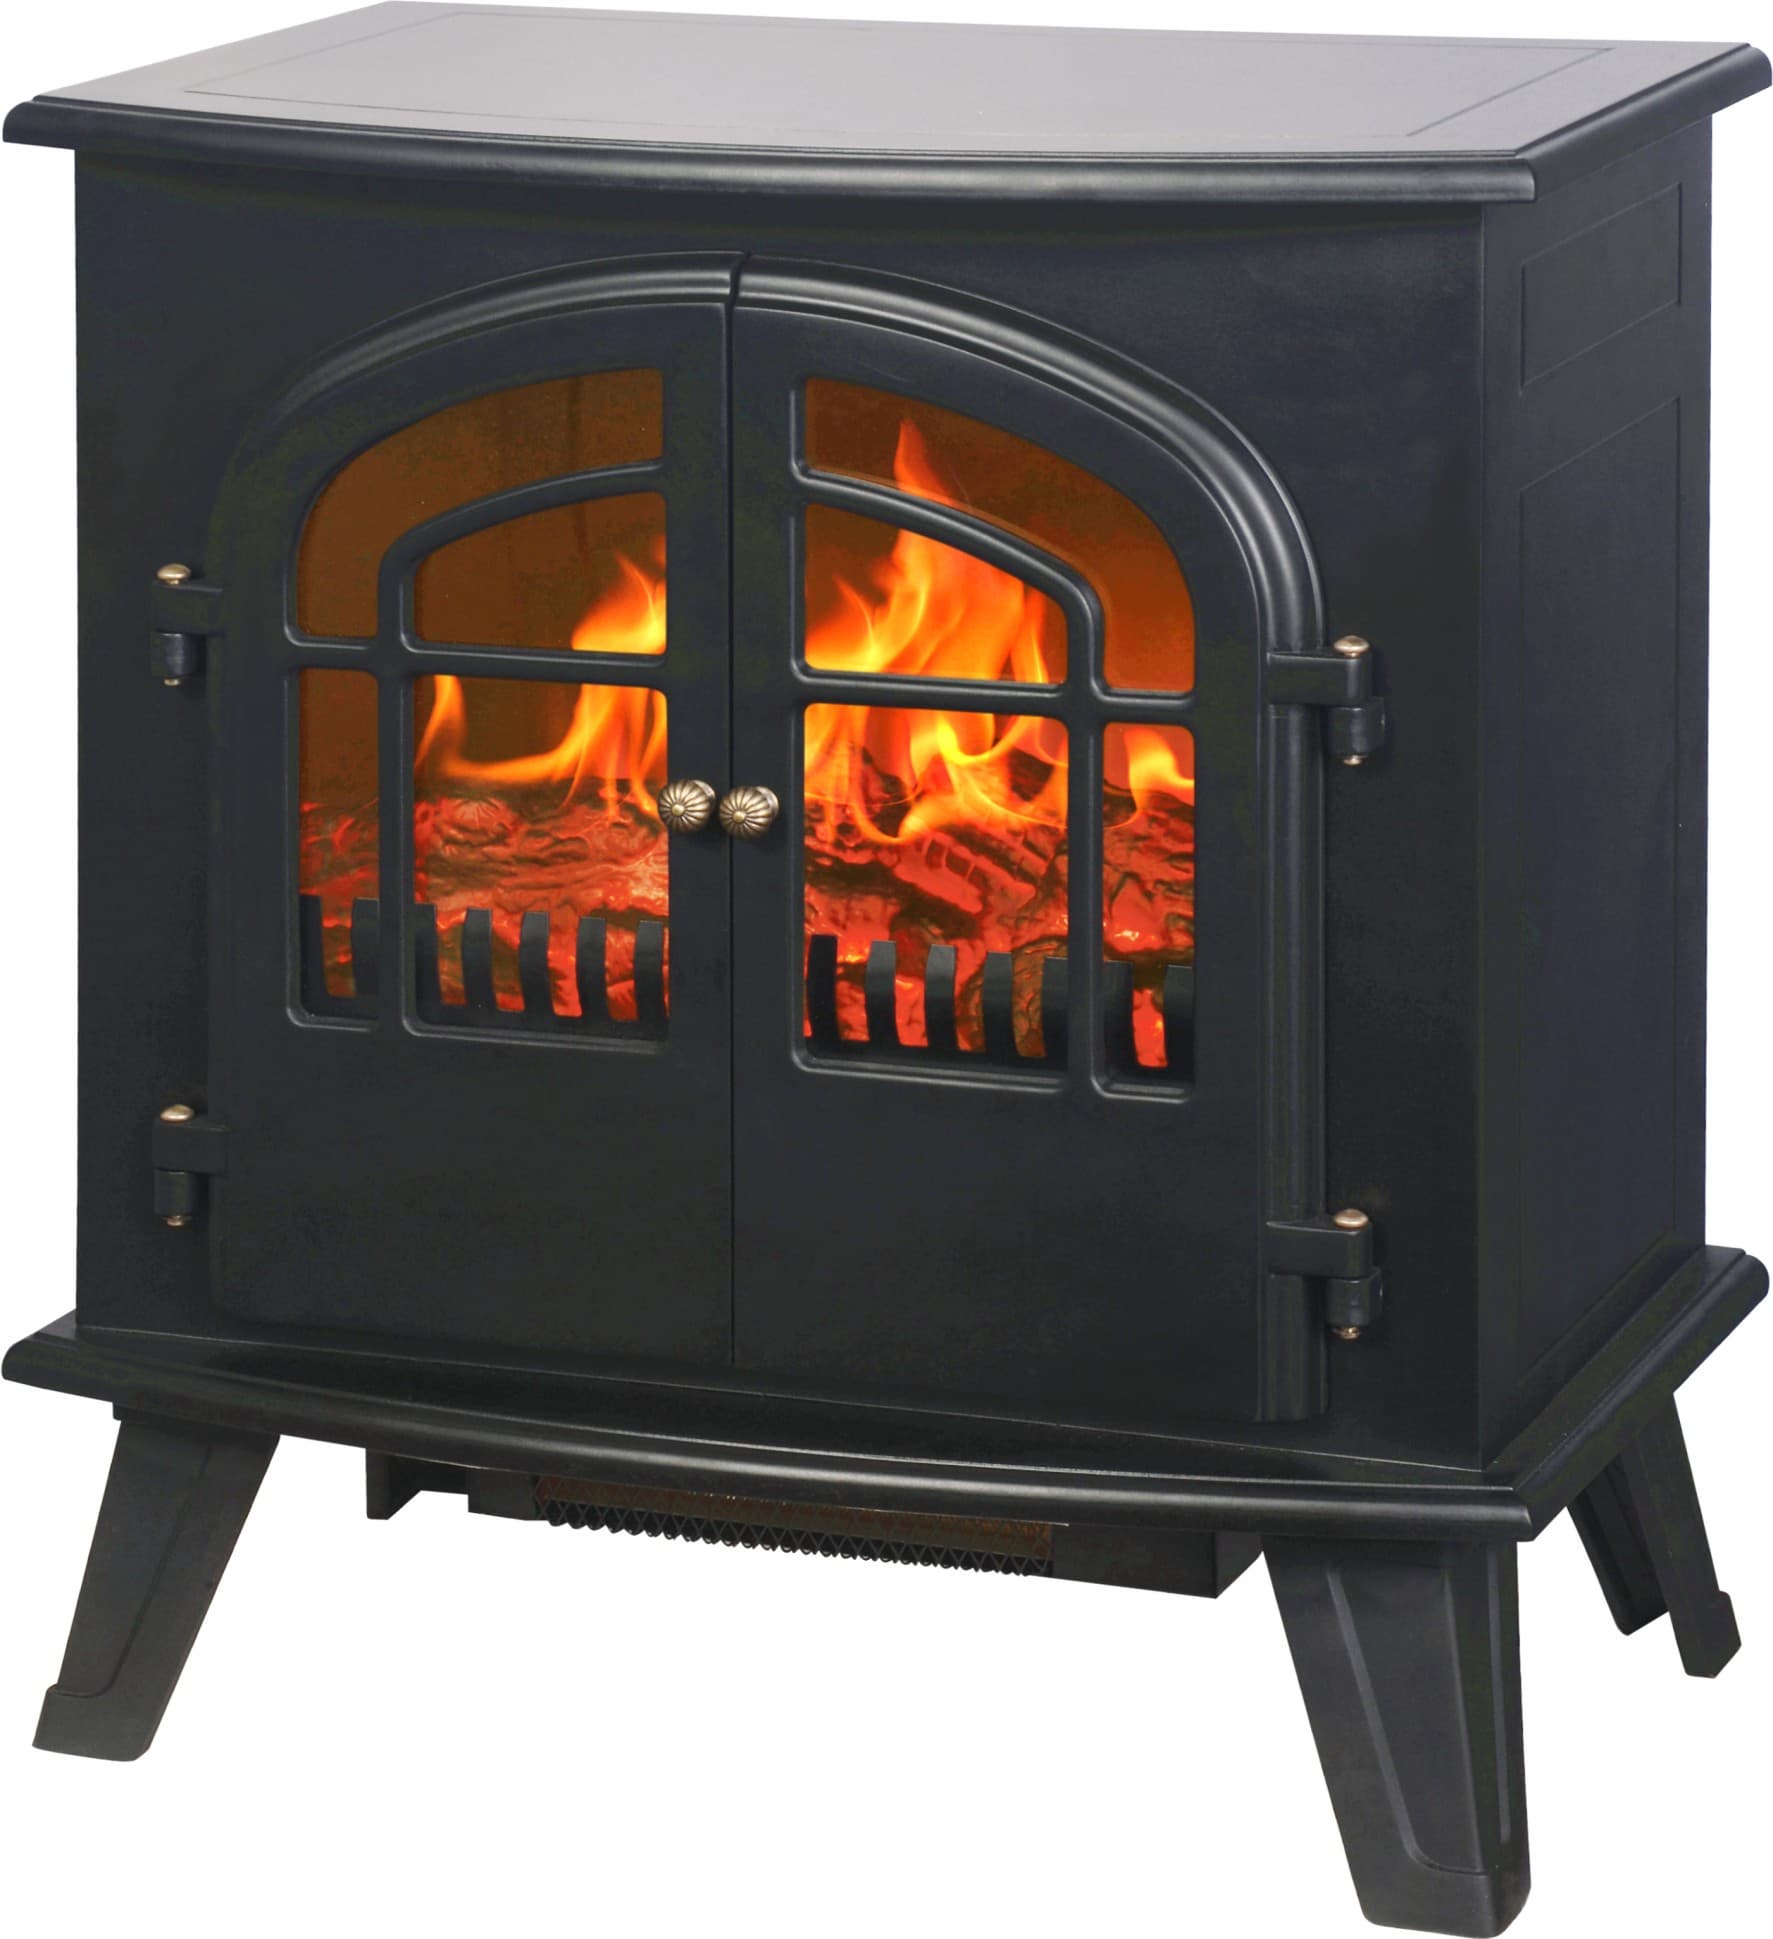 Openable classica fireplace heater